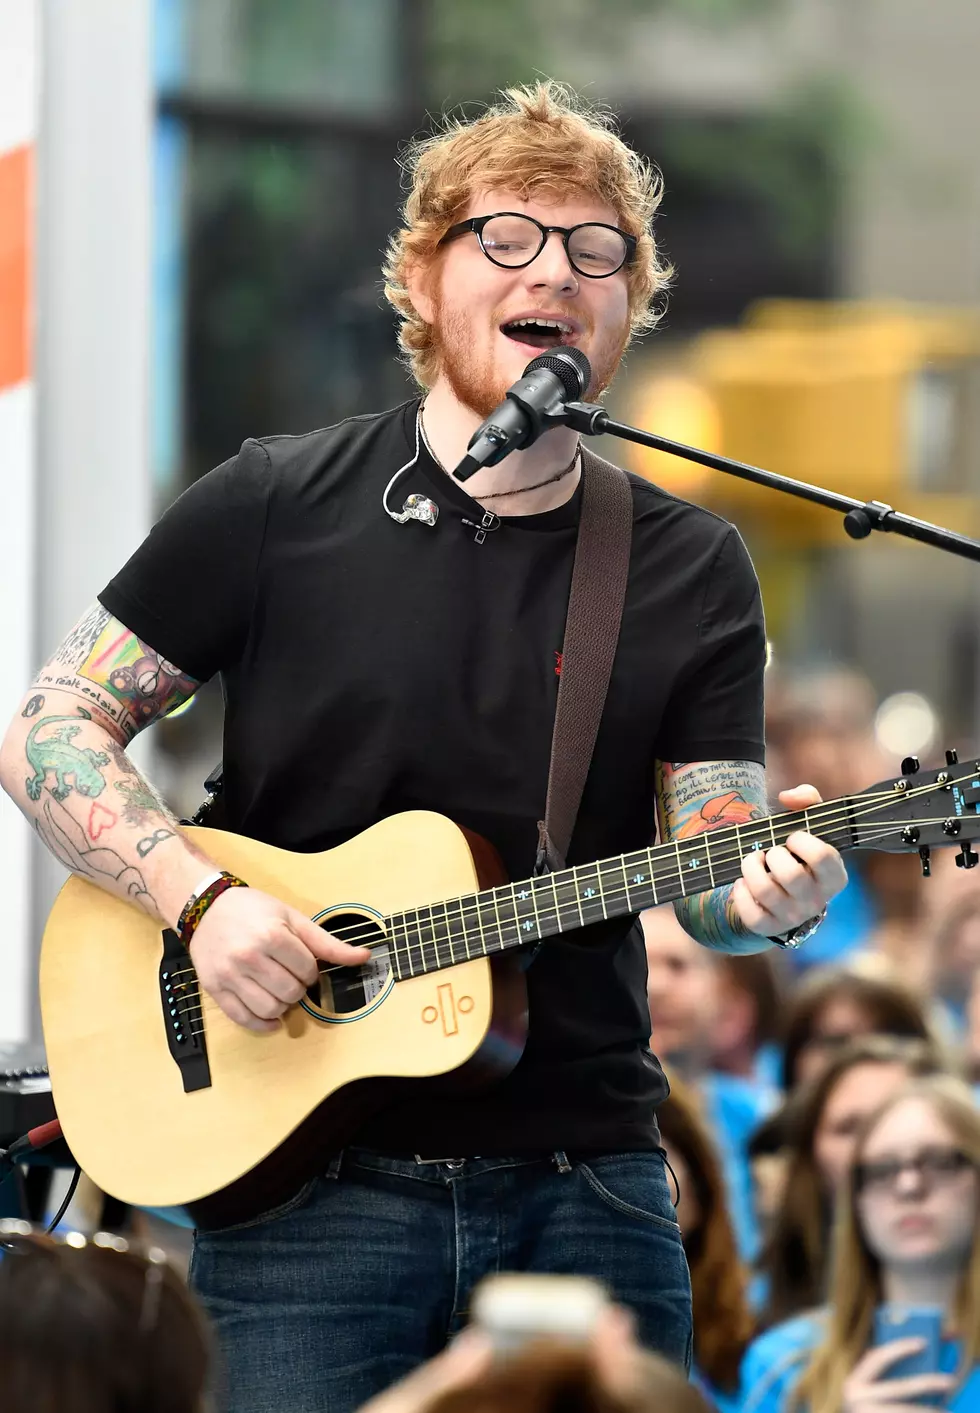 J-Si Hangs Backstage With Ed Sheeran For This Interview [VIDEO]